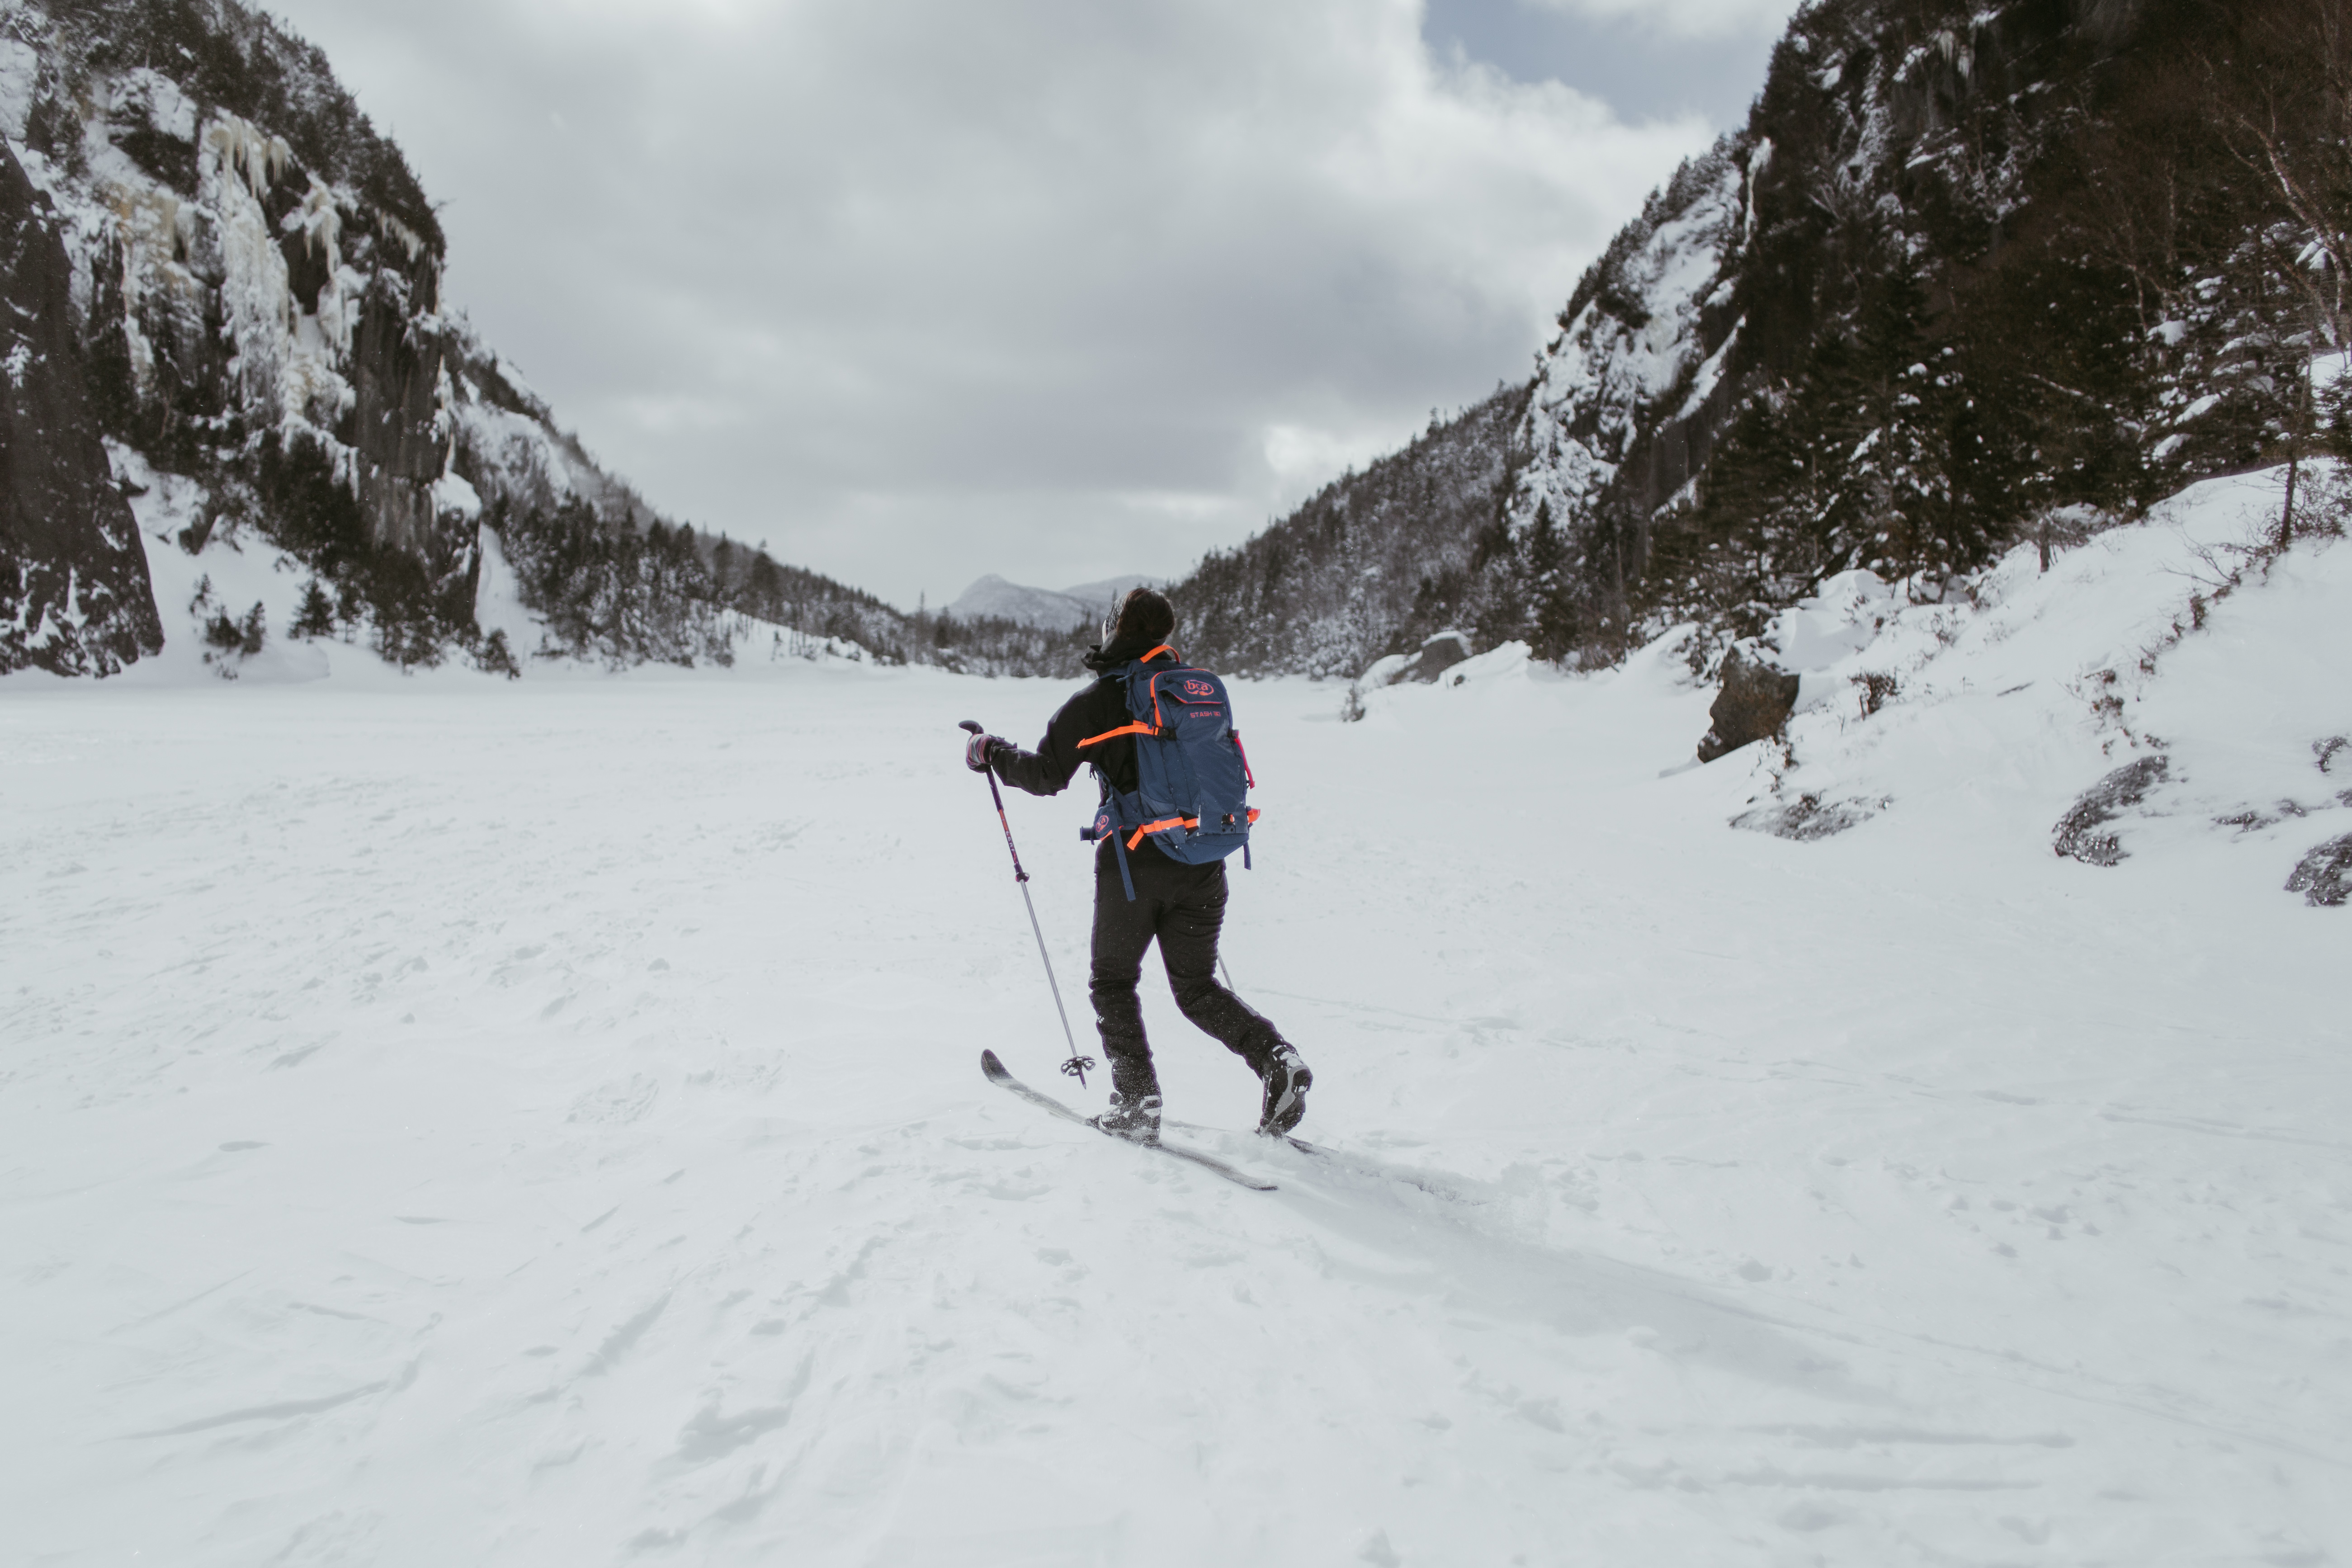 Adirondack Winter Trail Etiquette and Safety